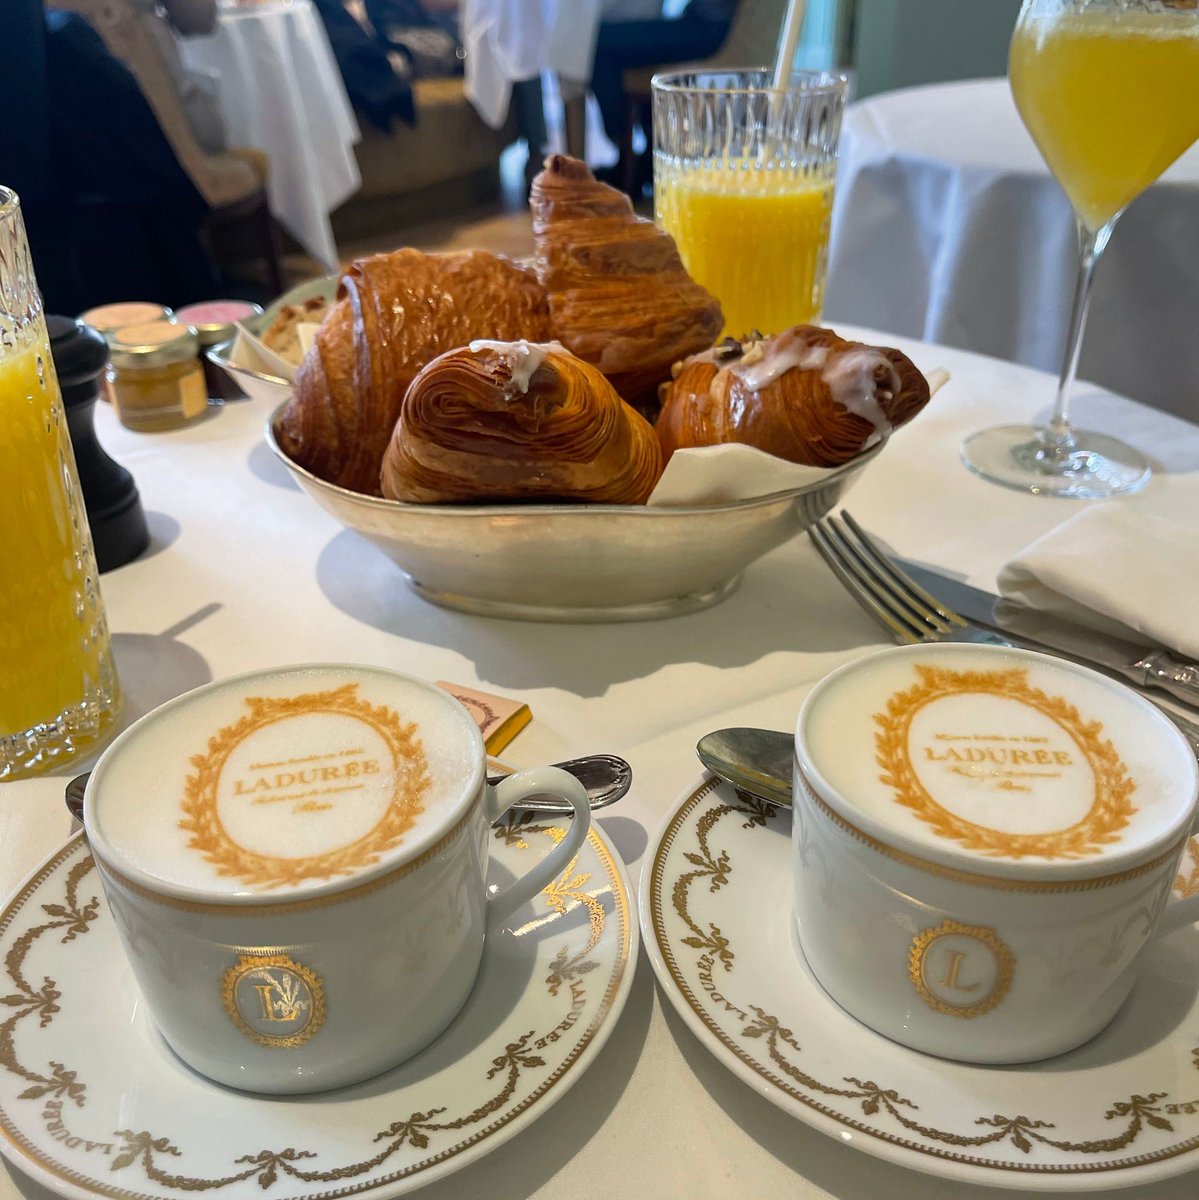 Weekend brunching. Your breakfast should be as beautiful as you are ✨ 

Tag someone you want to share this moment with! #traveleats #laduree #brunch